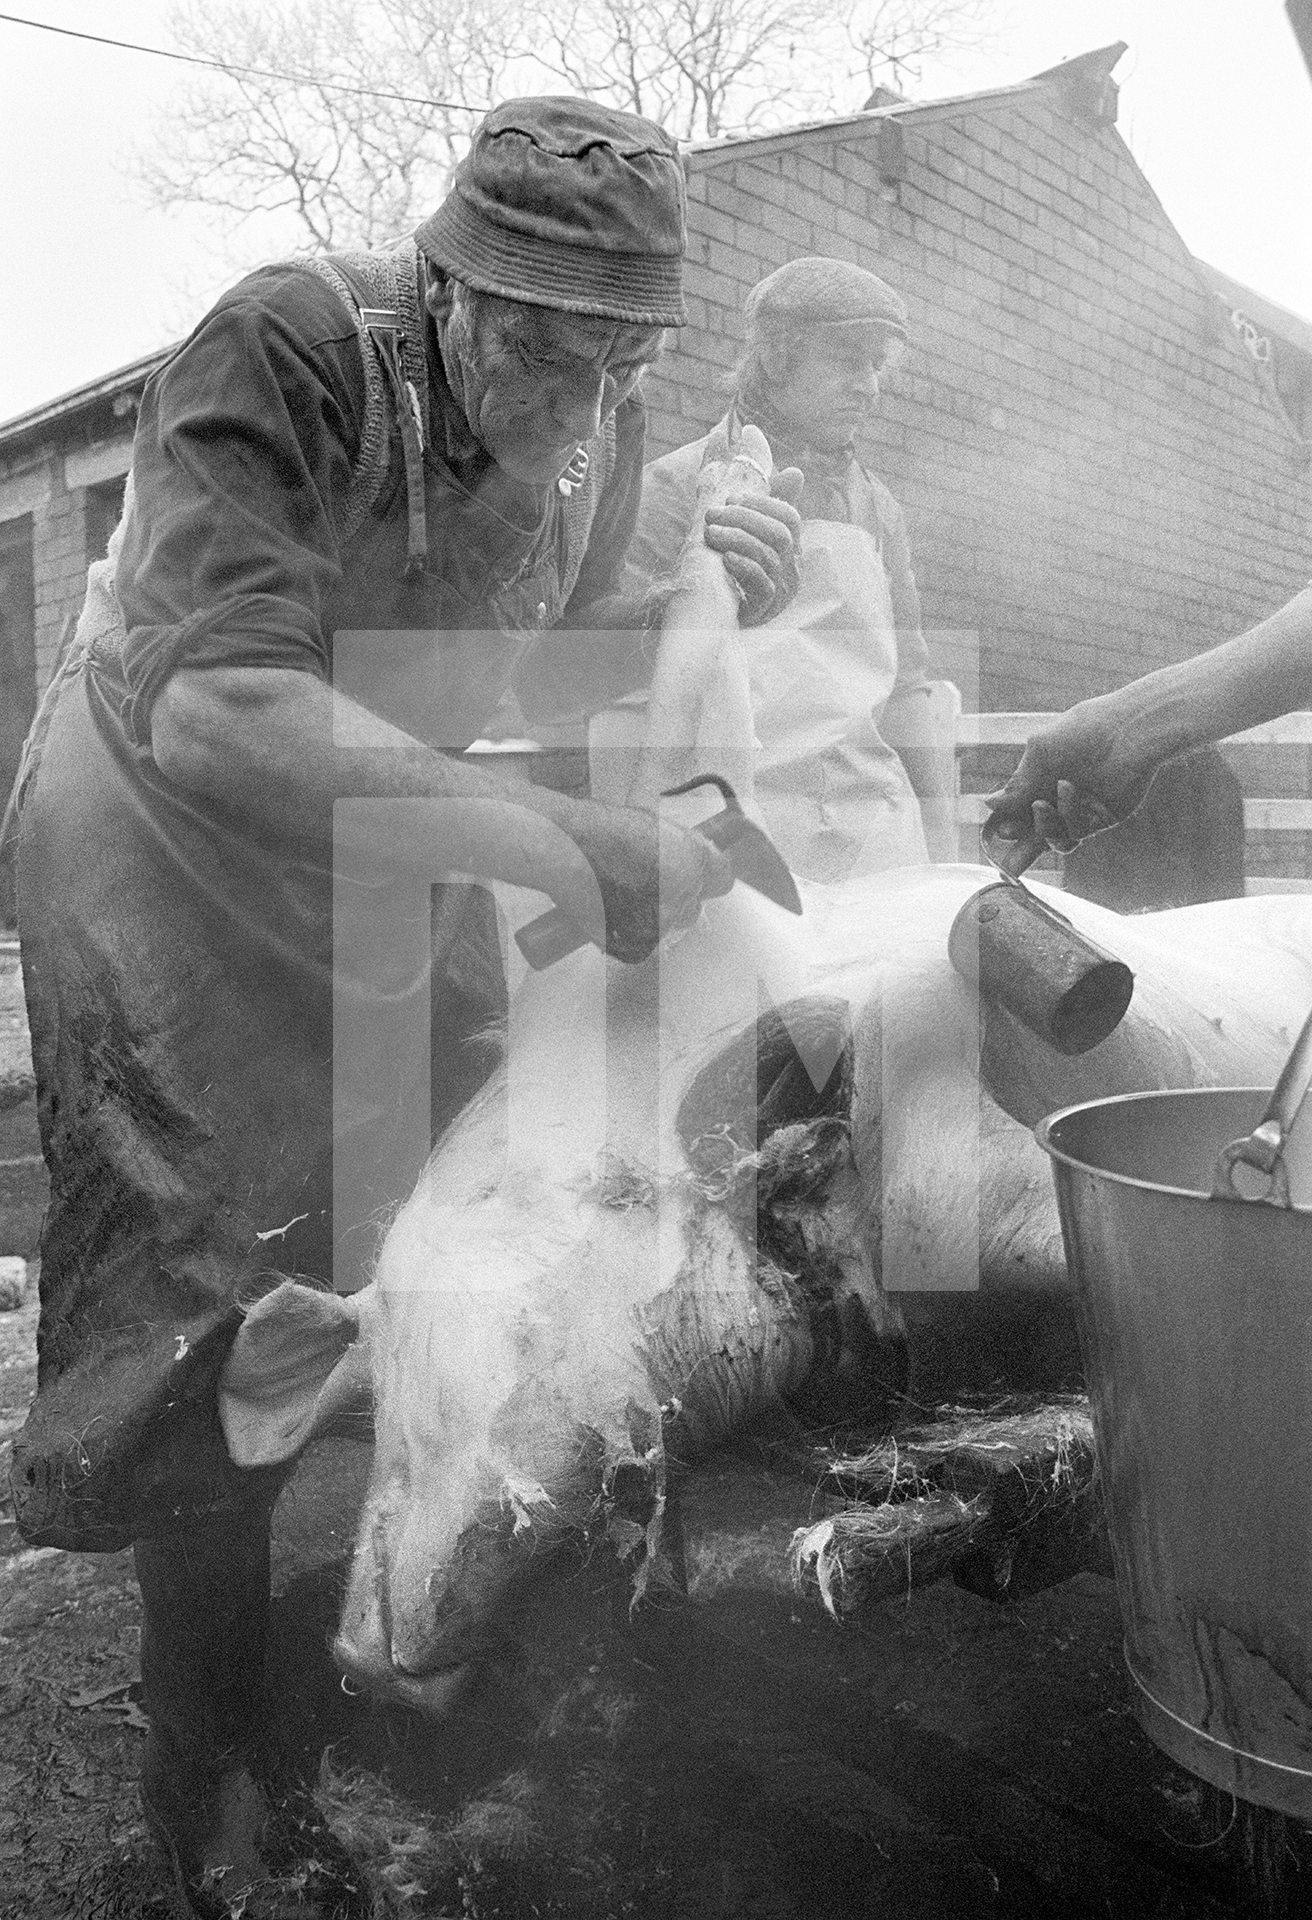 Butcher Everett Moore scrapes hair. Boiling water is ladled onto the flesh and the pig is shaved. North Yorkshire 1976 by Daniel Meadows